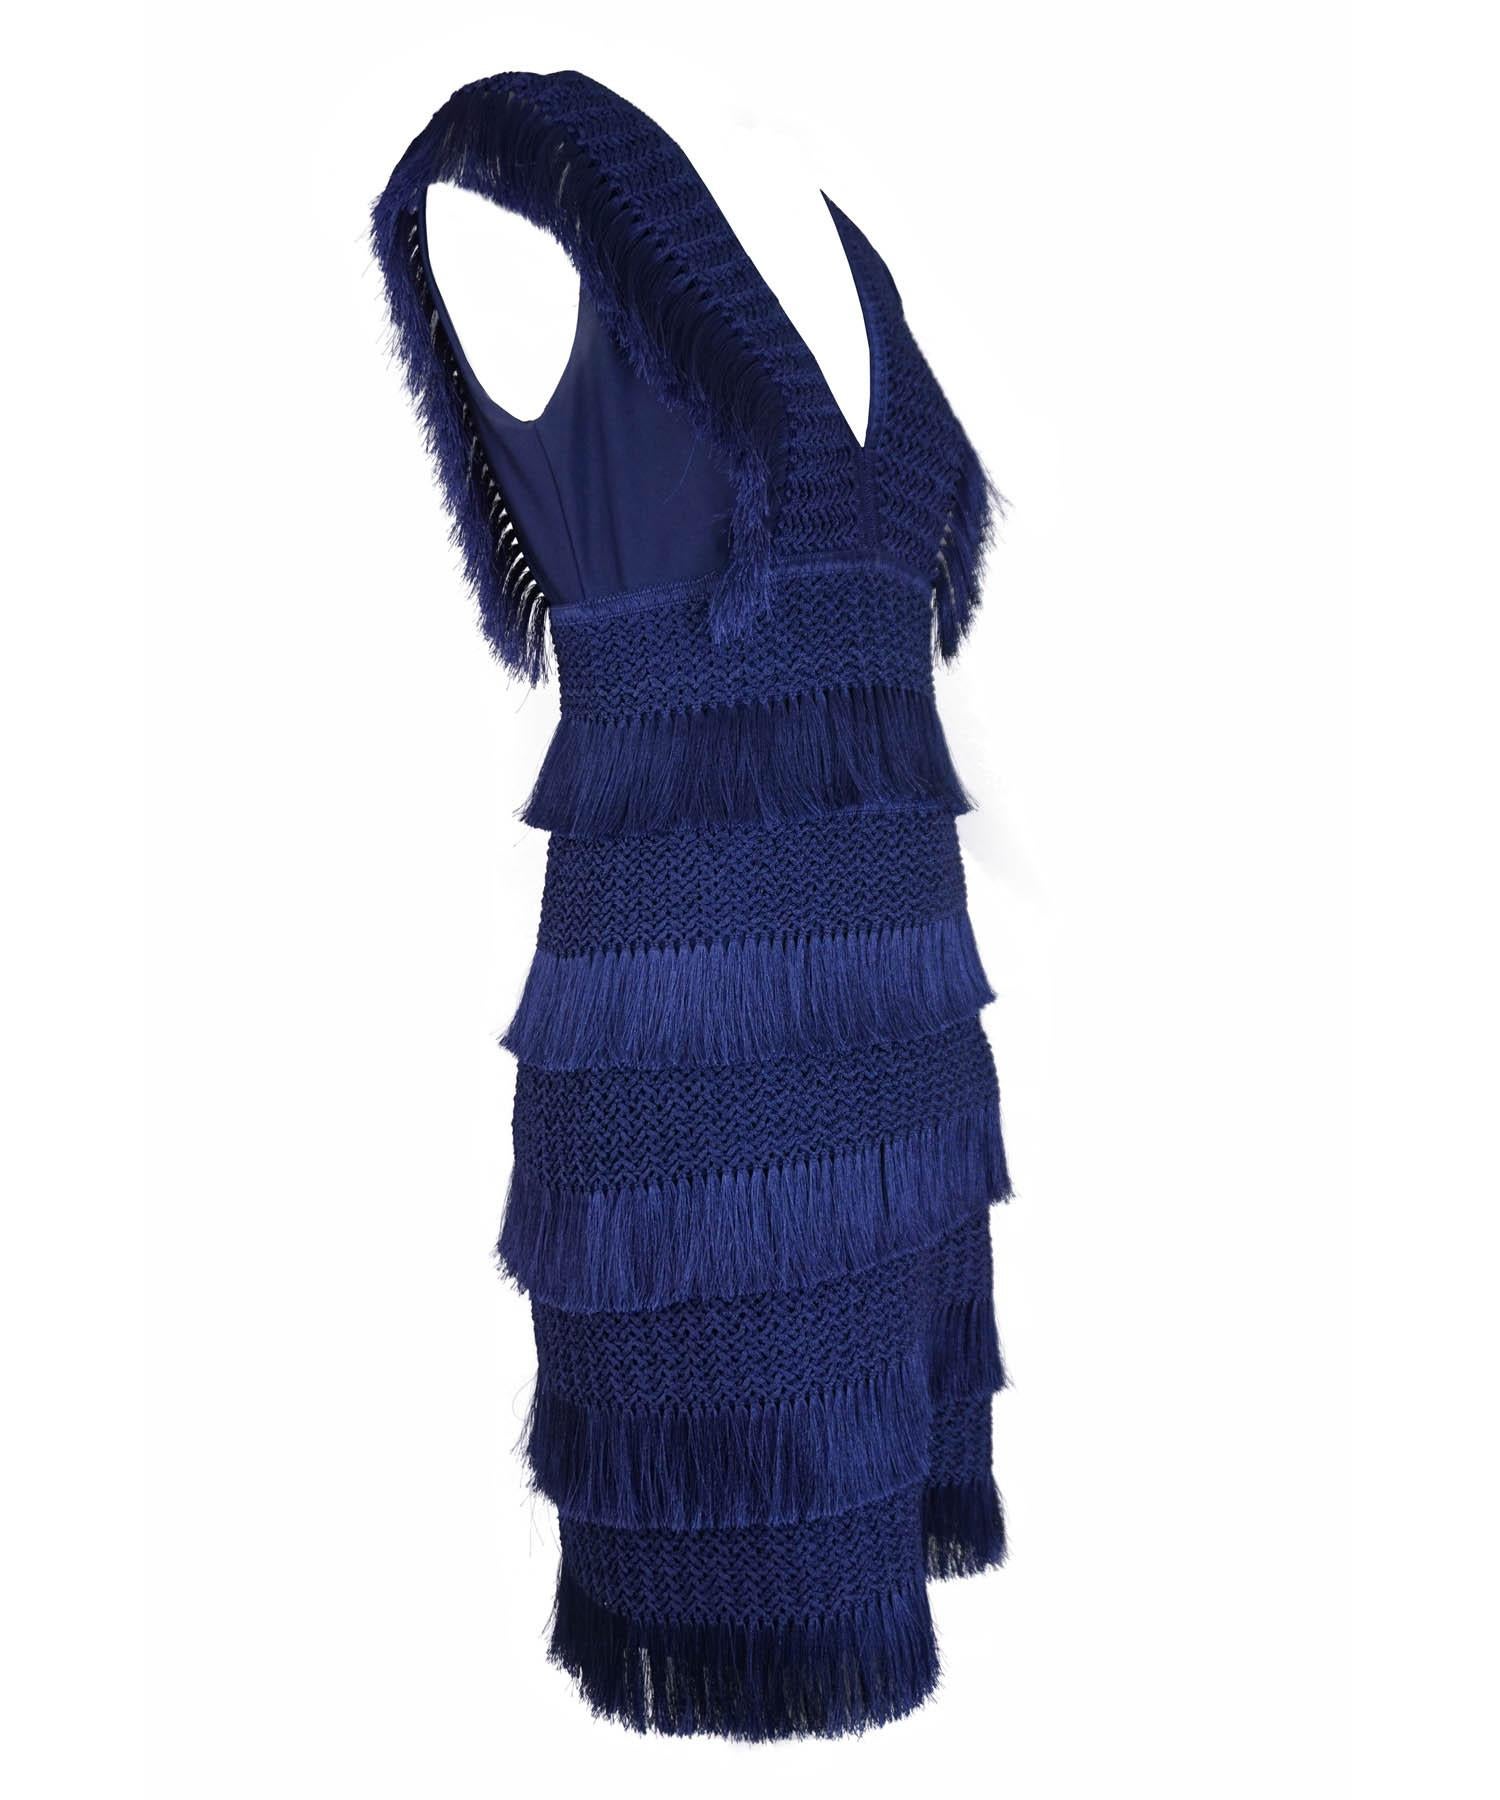 PatBo indigo blue crochet bodycon fringe mini dress. Features v neck, rear concealed zipper, light stretch to fabric. As seen on Jessica Williams on Shrinking. Designer size 6. Made in Brazil.



Condition:

Excellent.
Measurements:

Shoulder: